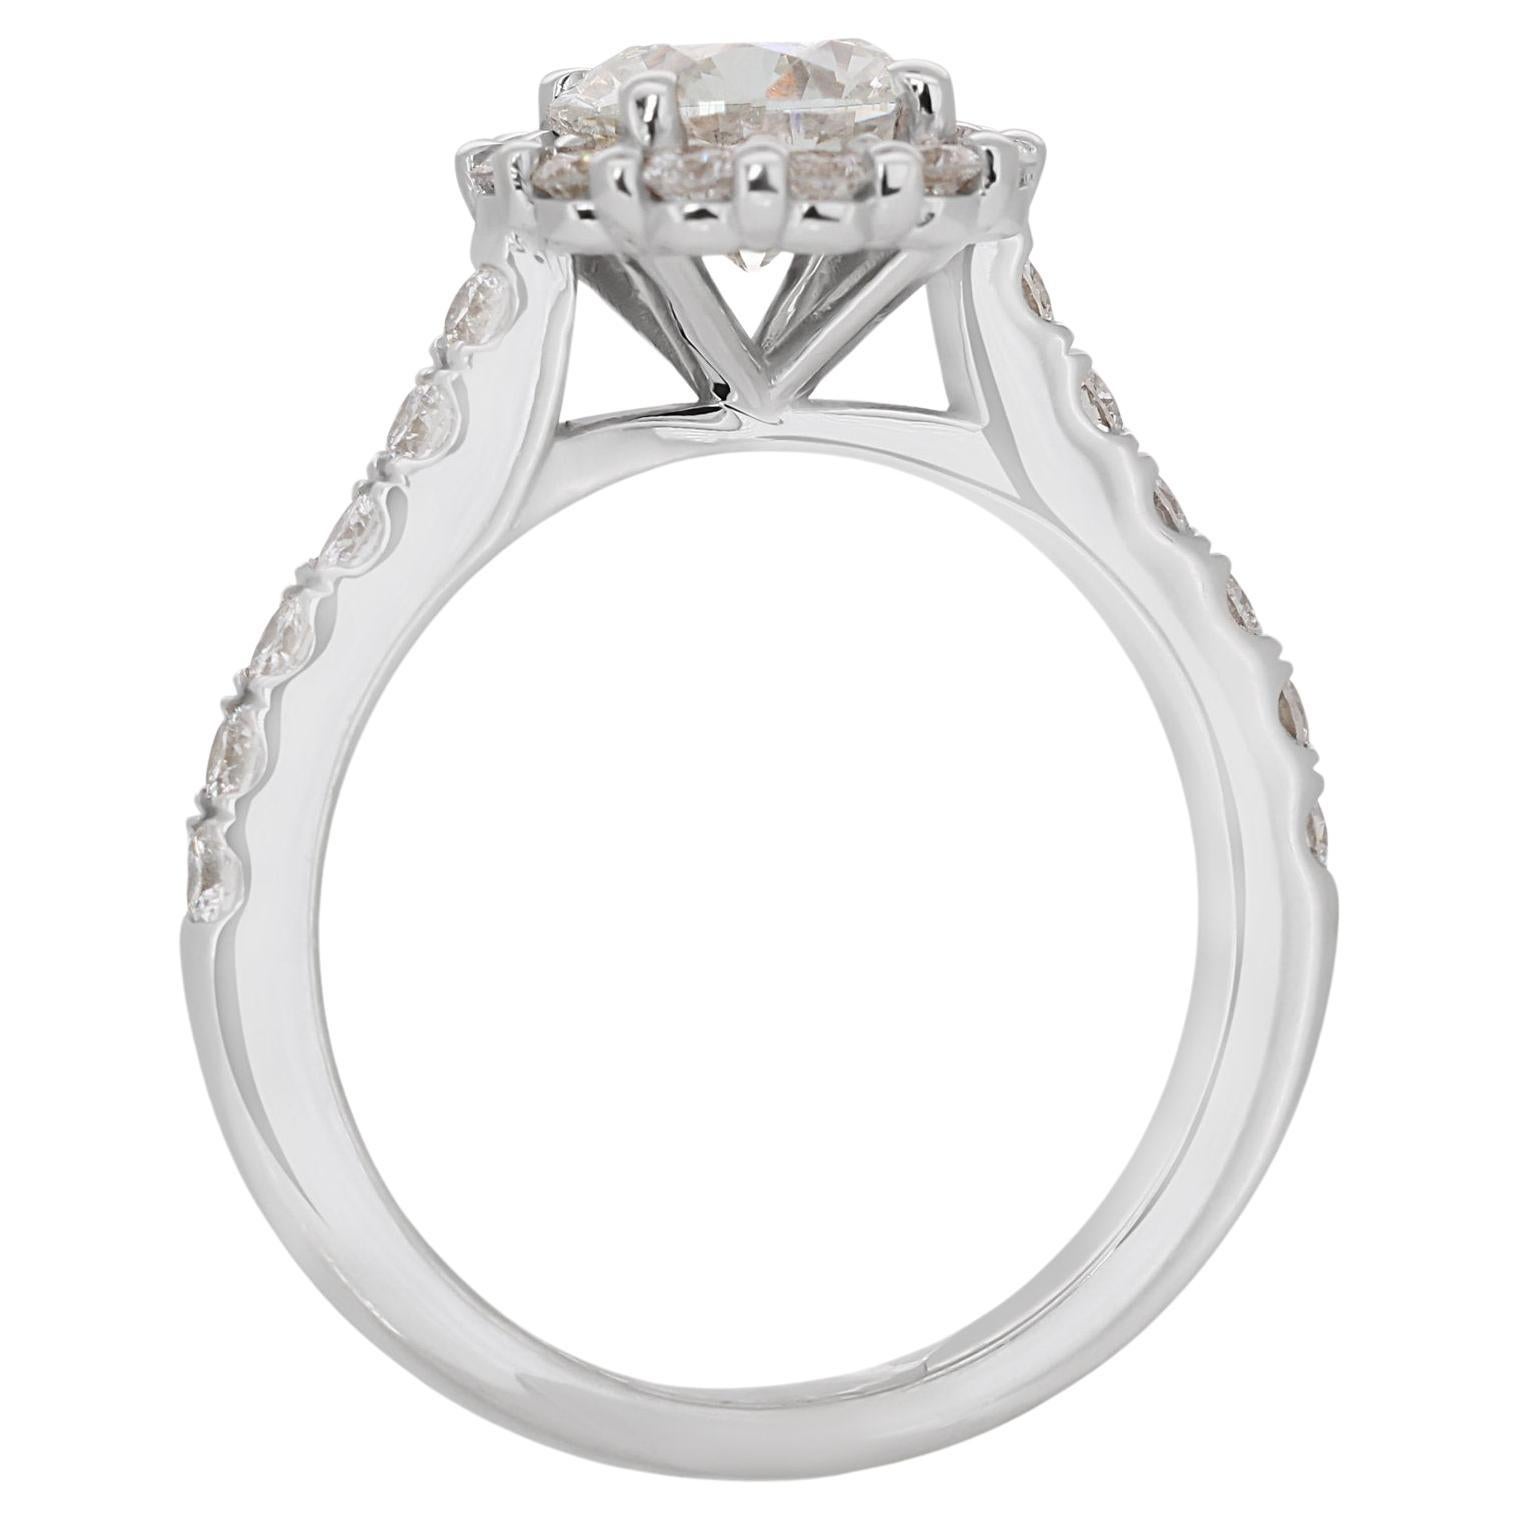 Luxurious 1.72ct Diamond Halo Ring in 18k White Gold - GIA Certified For Sale 2